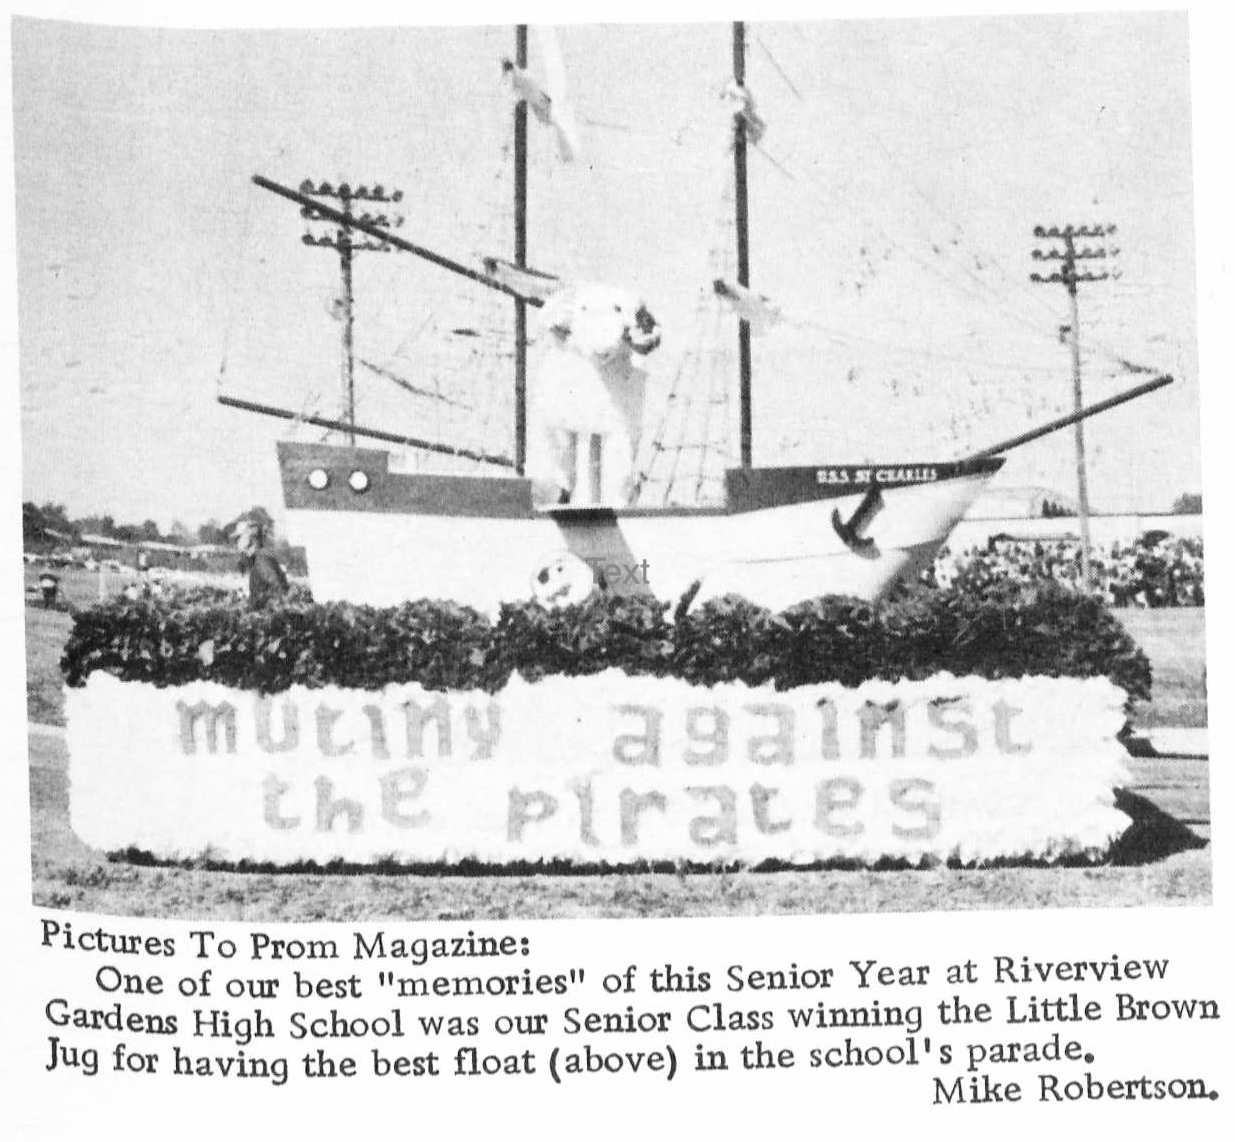 MUTINY AGAINST THE PIRATES-CLASS OF 1969 HOMECOMING FLOAT AND LITTLE BROWN JUG WINNER featured in PICTURES TO PROM MAGAZINE JANUARY 1969.